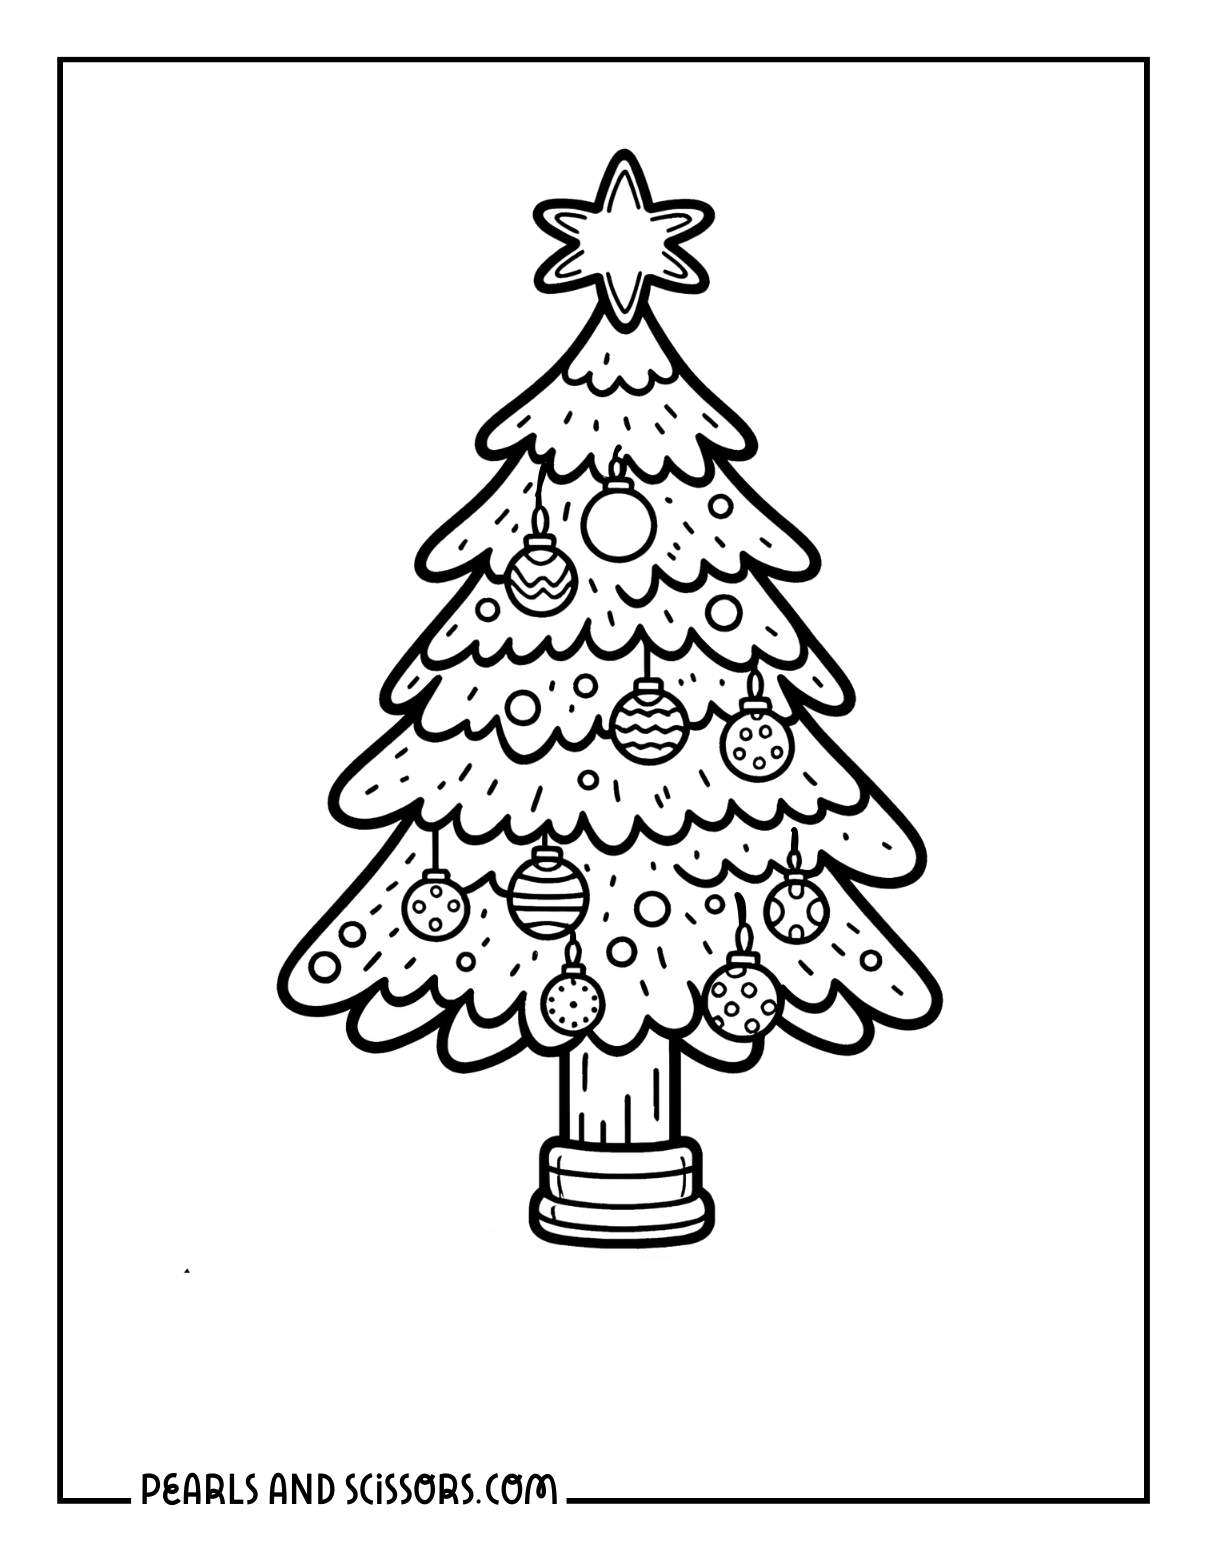 Christmas tree with ornaments coloring page.